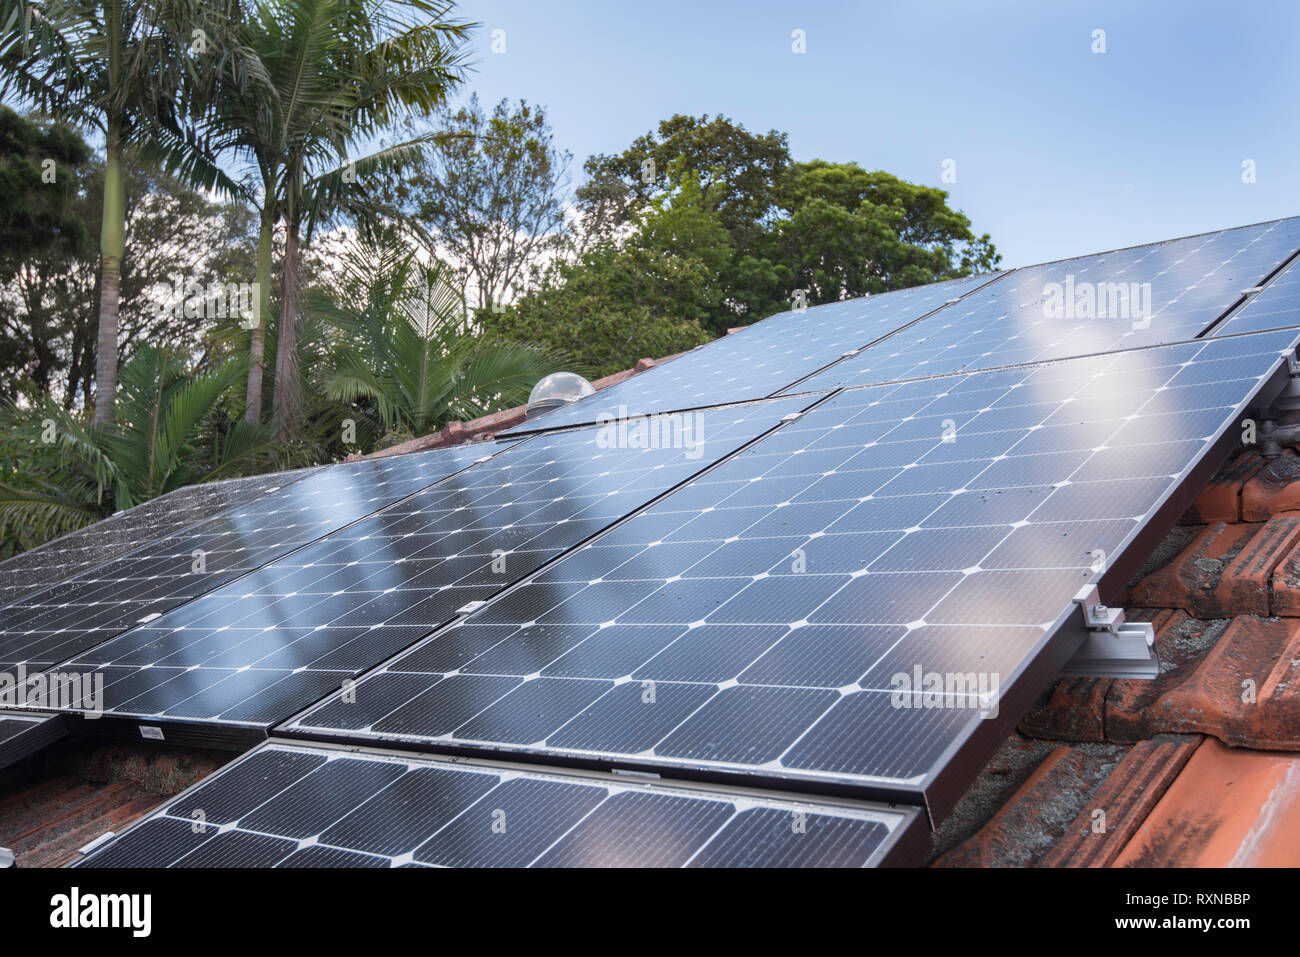 An array of roof top solar photo voltaic (PV) panels on a home in Sydney Australia. These panels are all installed with individual micro inverters. Stock Photo